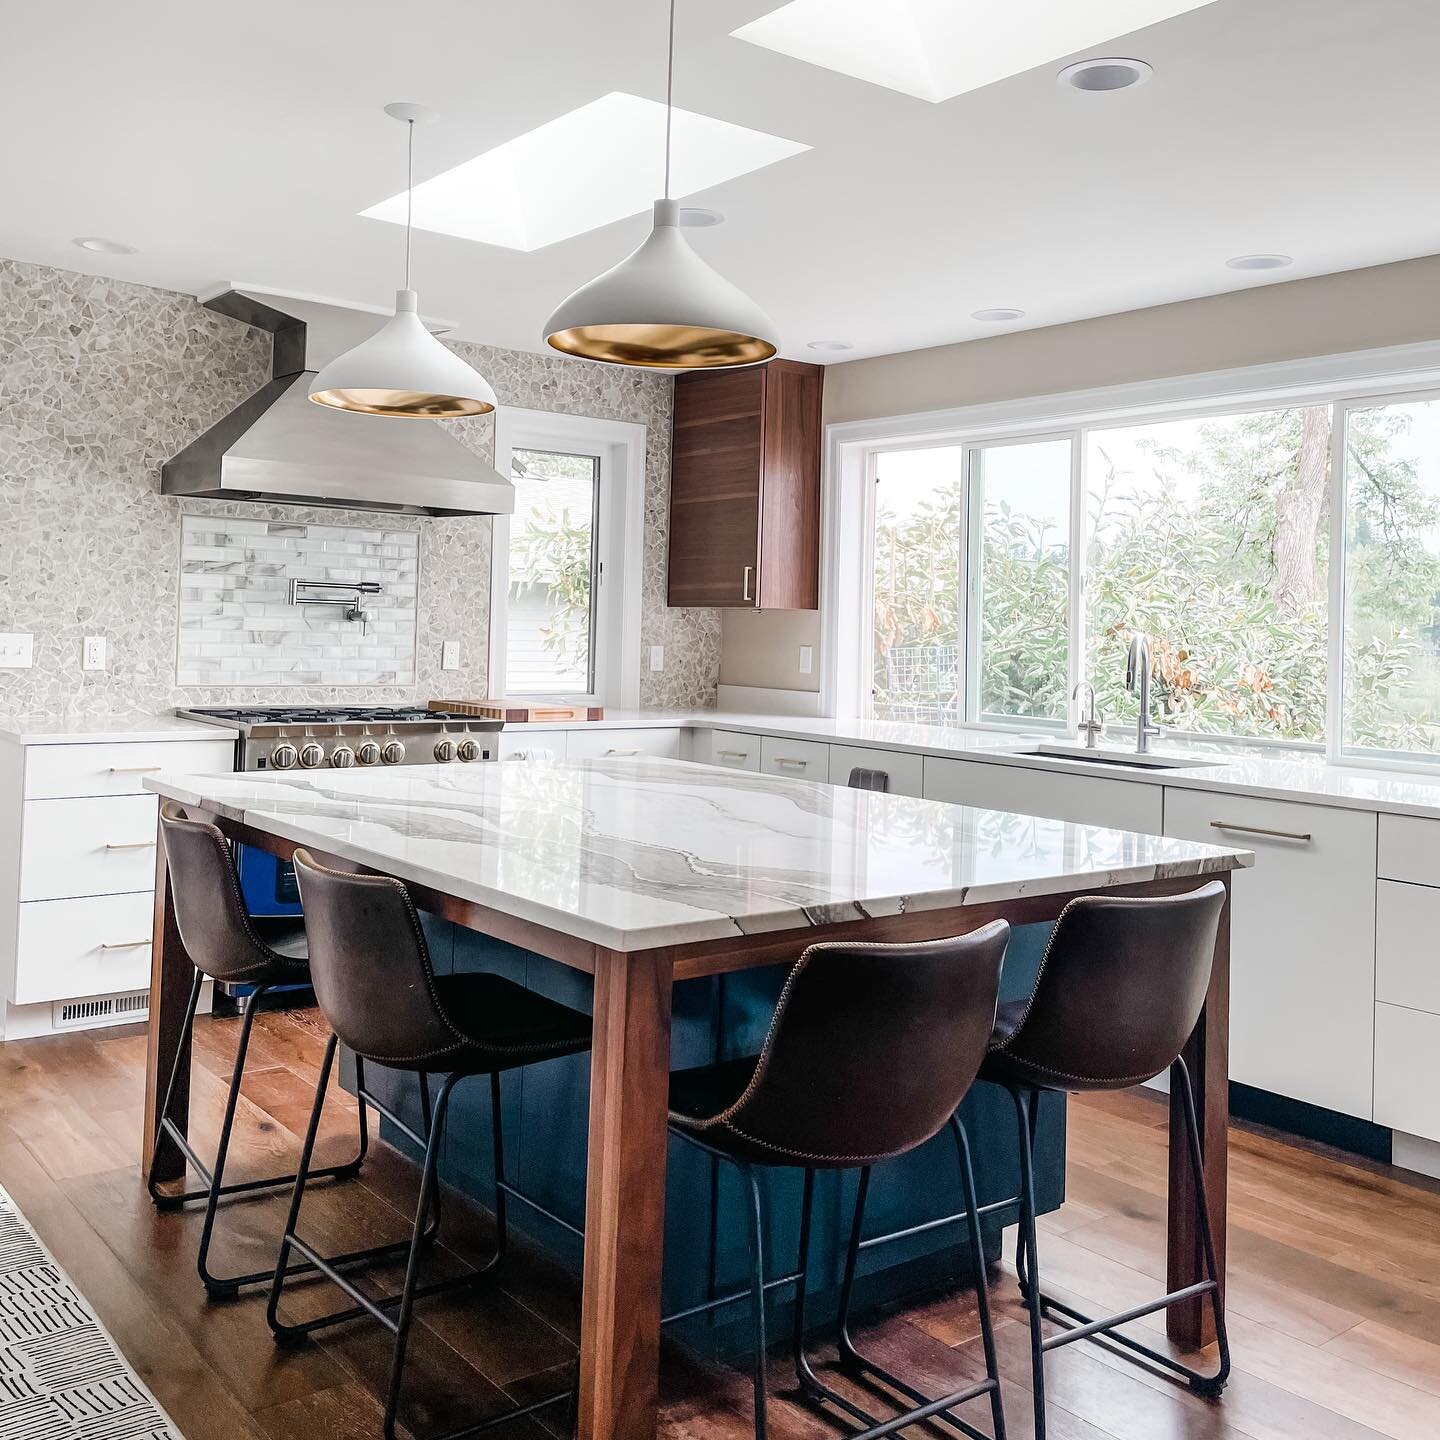 #beforeandafter ⬅️ We just wrapped up this kitchen in West Linn on the river and we so enjoyed working with this sweet family!  Loving the combo of white, blue and rich walnut.  More angles of this beauty coming soon... 
.
.
.
.
.
.
.
.
#pnwhomes #po